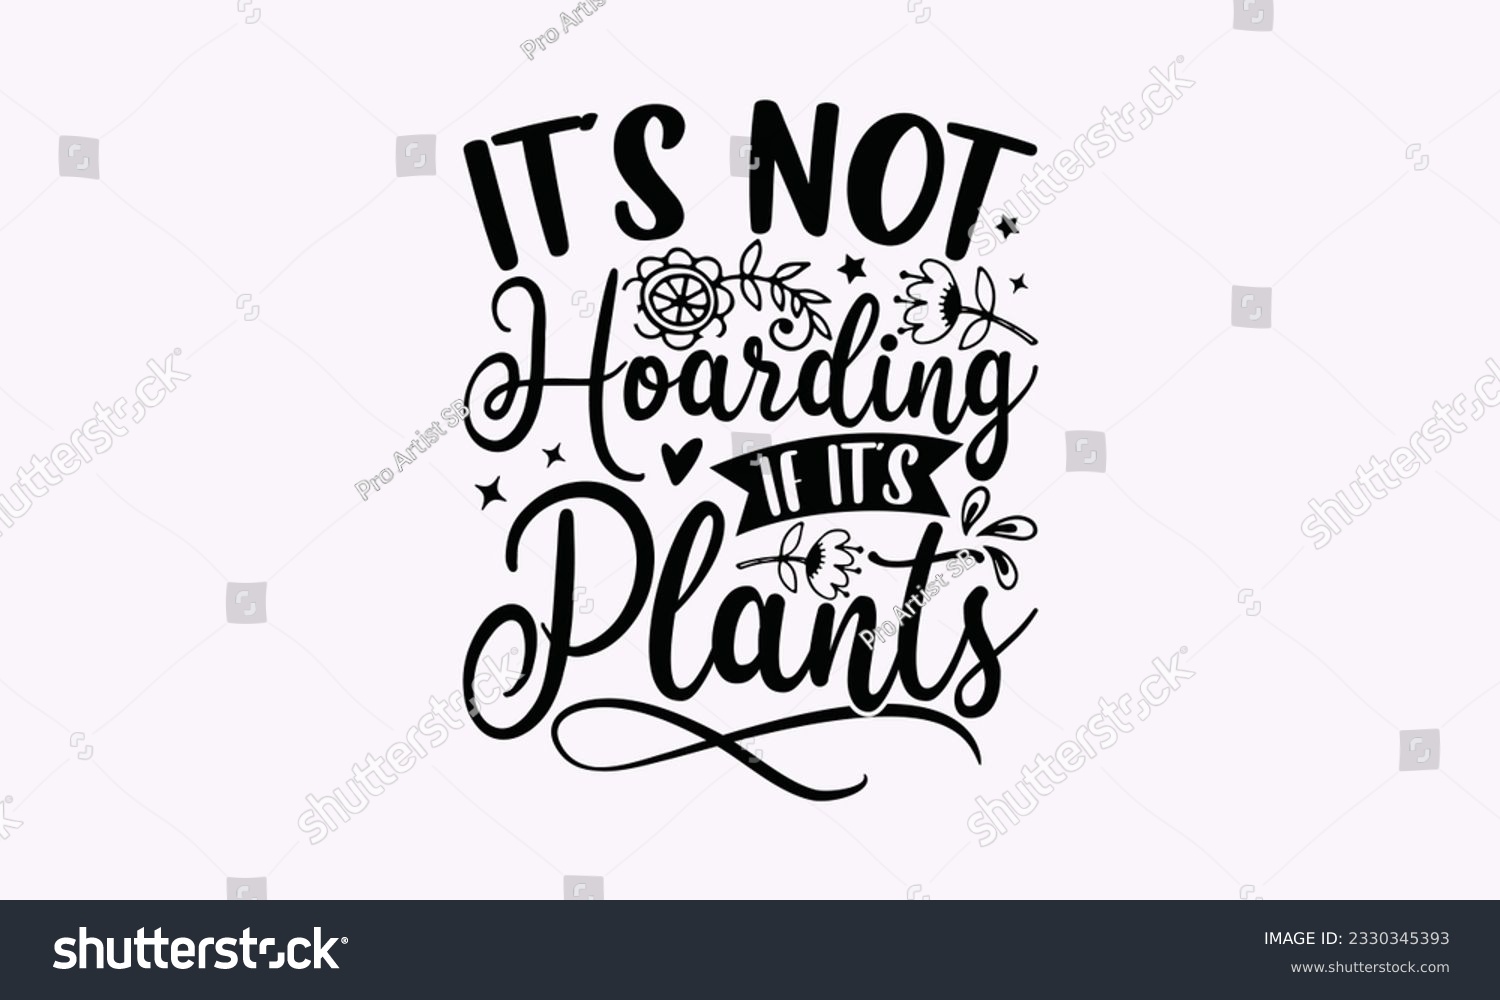 SVG of It’s not hoarding if it’s plants - Gardening SVG Design, plant Quotes, Hand drawn lettering phrase, Isolated on white background. svg